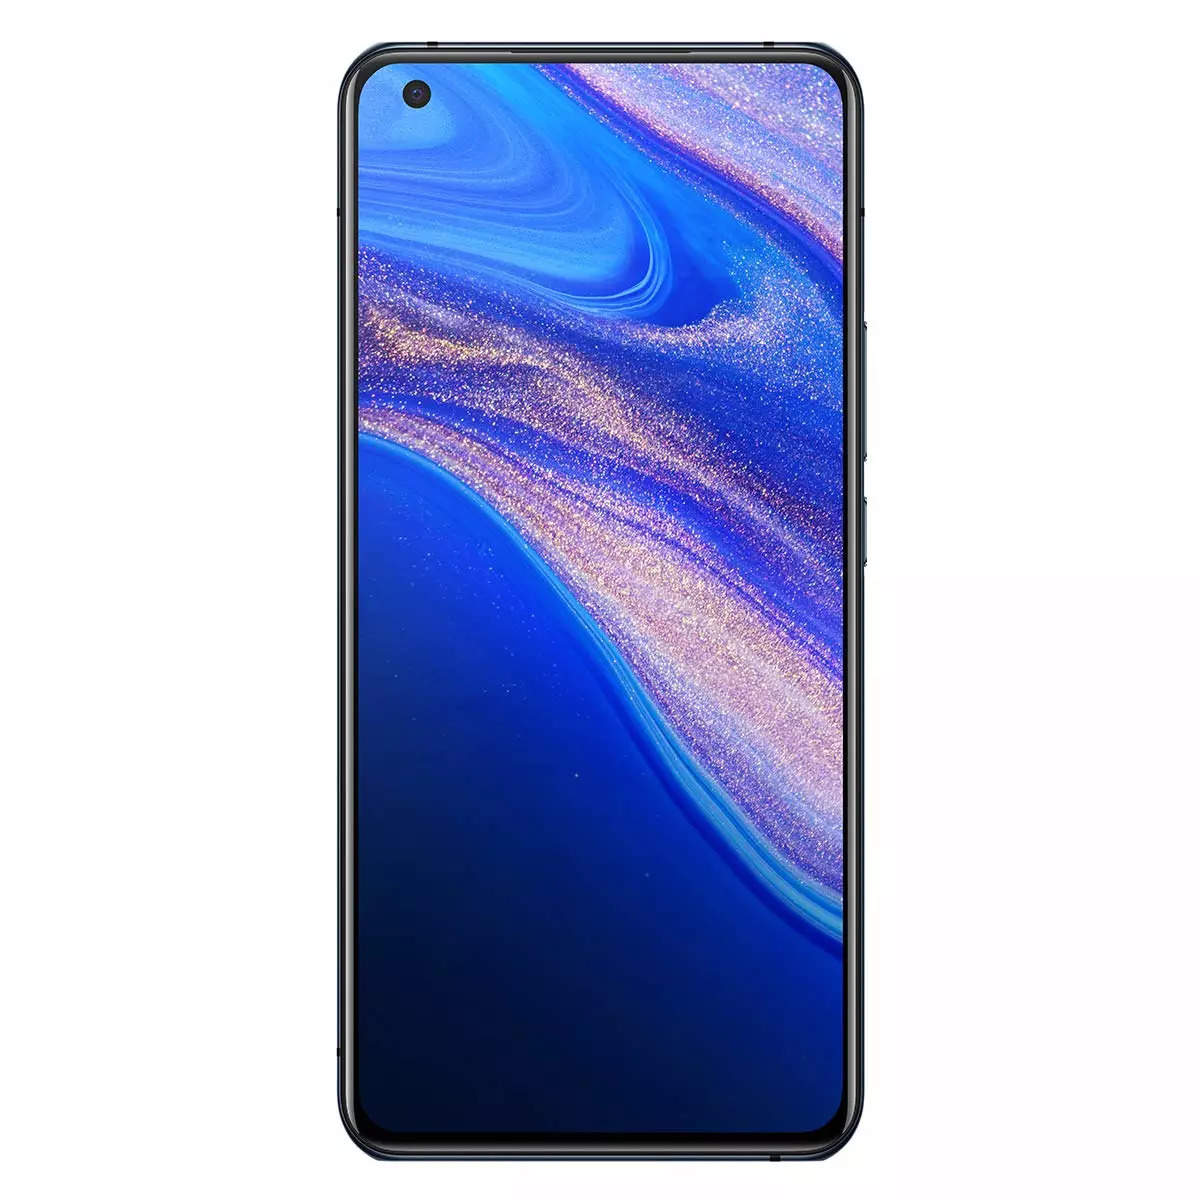 realme 10: Realme 10 - Unveiling pricing and specifications of the latest  feature-packed smartphone under 15000 - The Economic Times